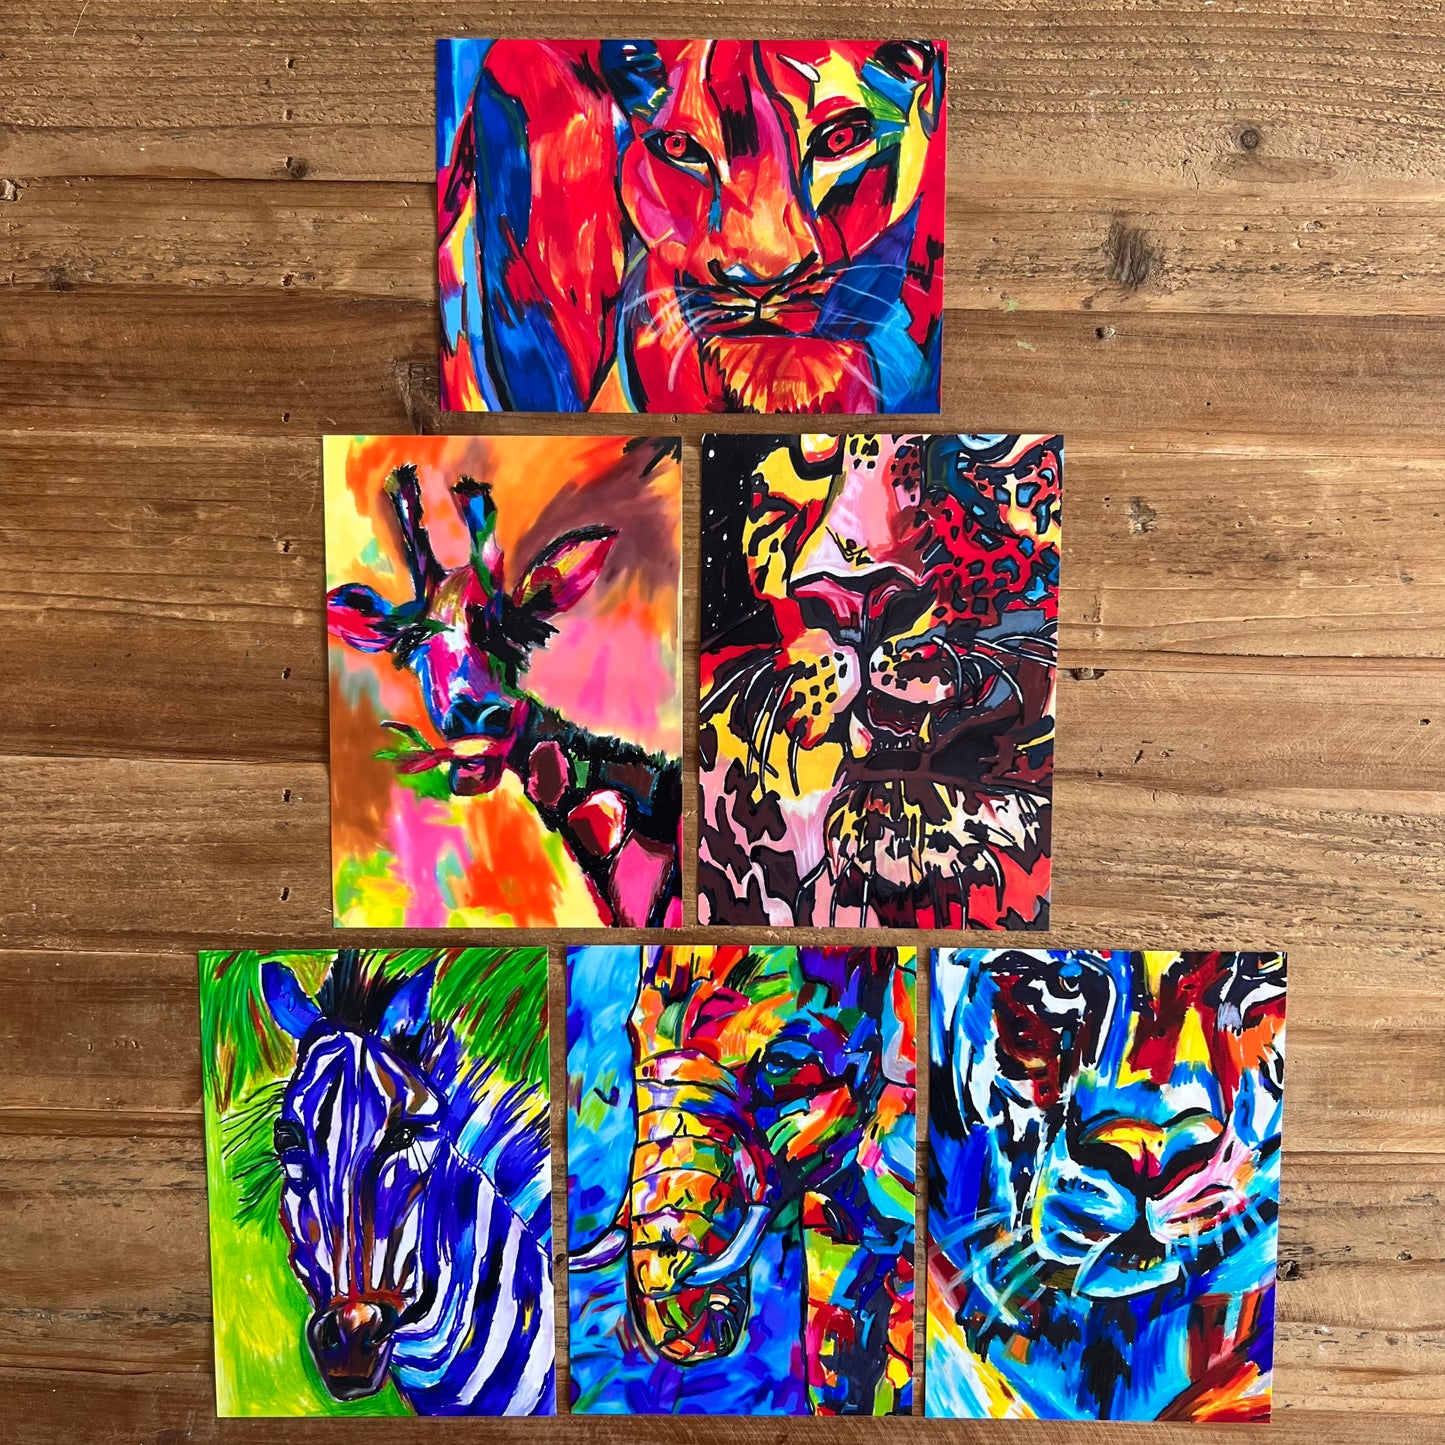 Safari animals -Set of 6 prints in size 5x7" for $25